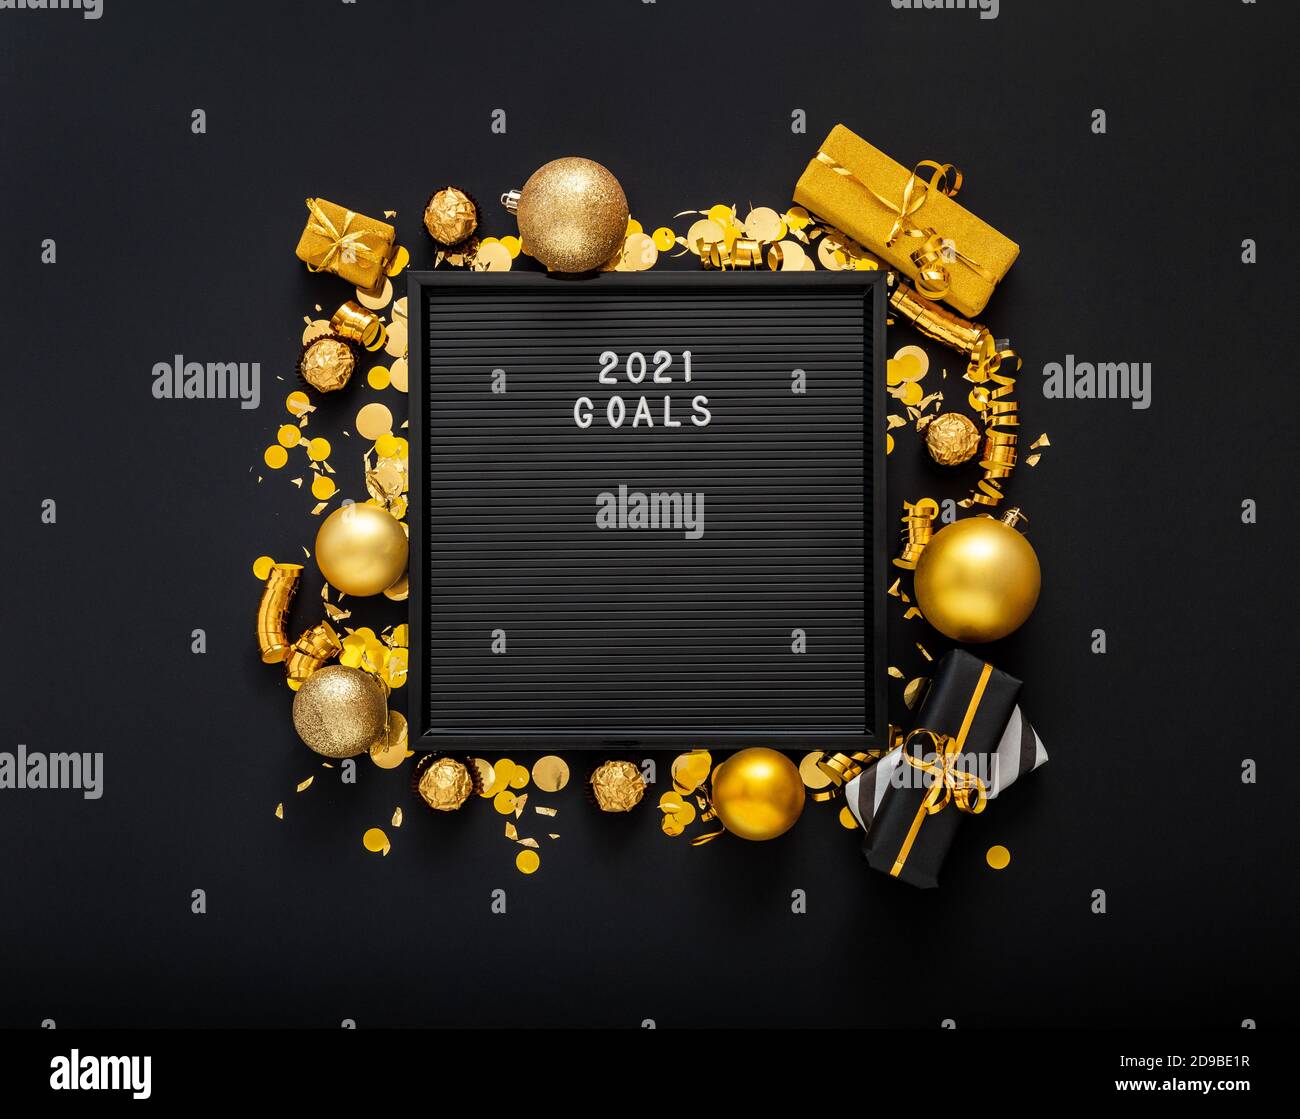 2021 Goals text on black Letter Board in frame made of gold Christmas festive decor, gift boxes, confetti balls. New year 2021 goals, resolution check Stock Photo